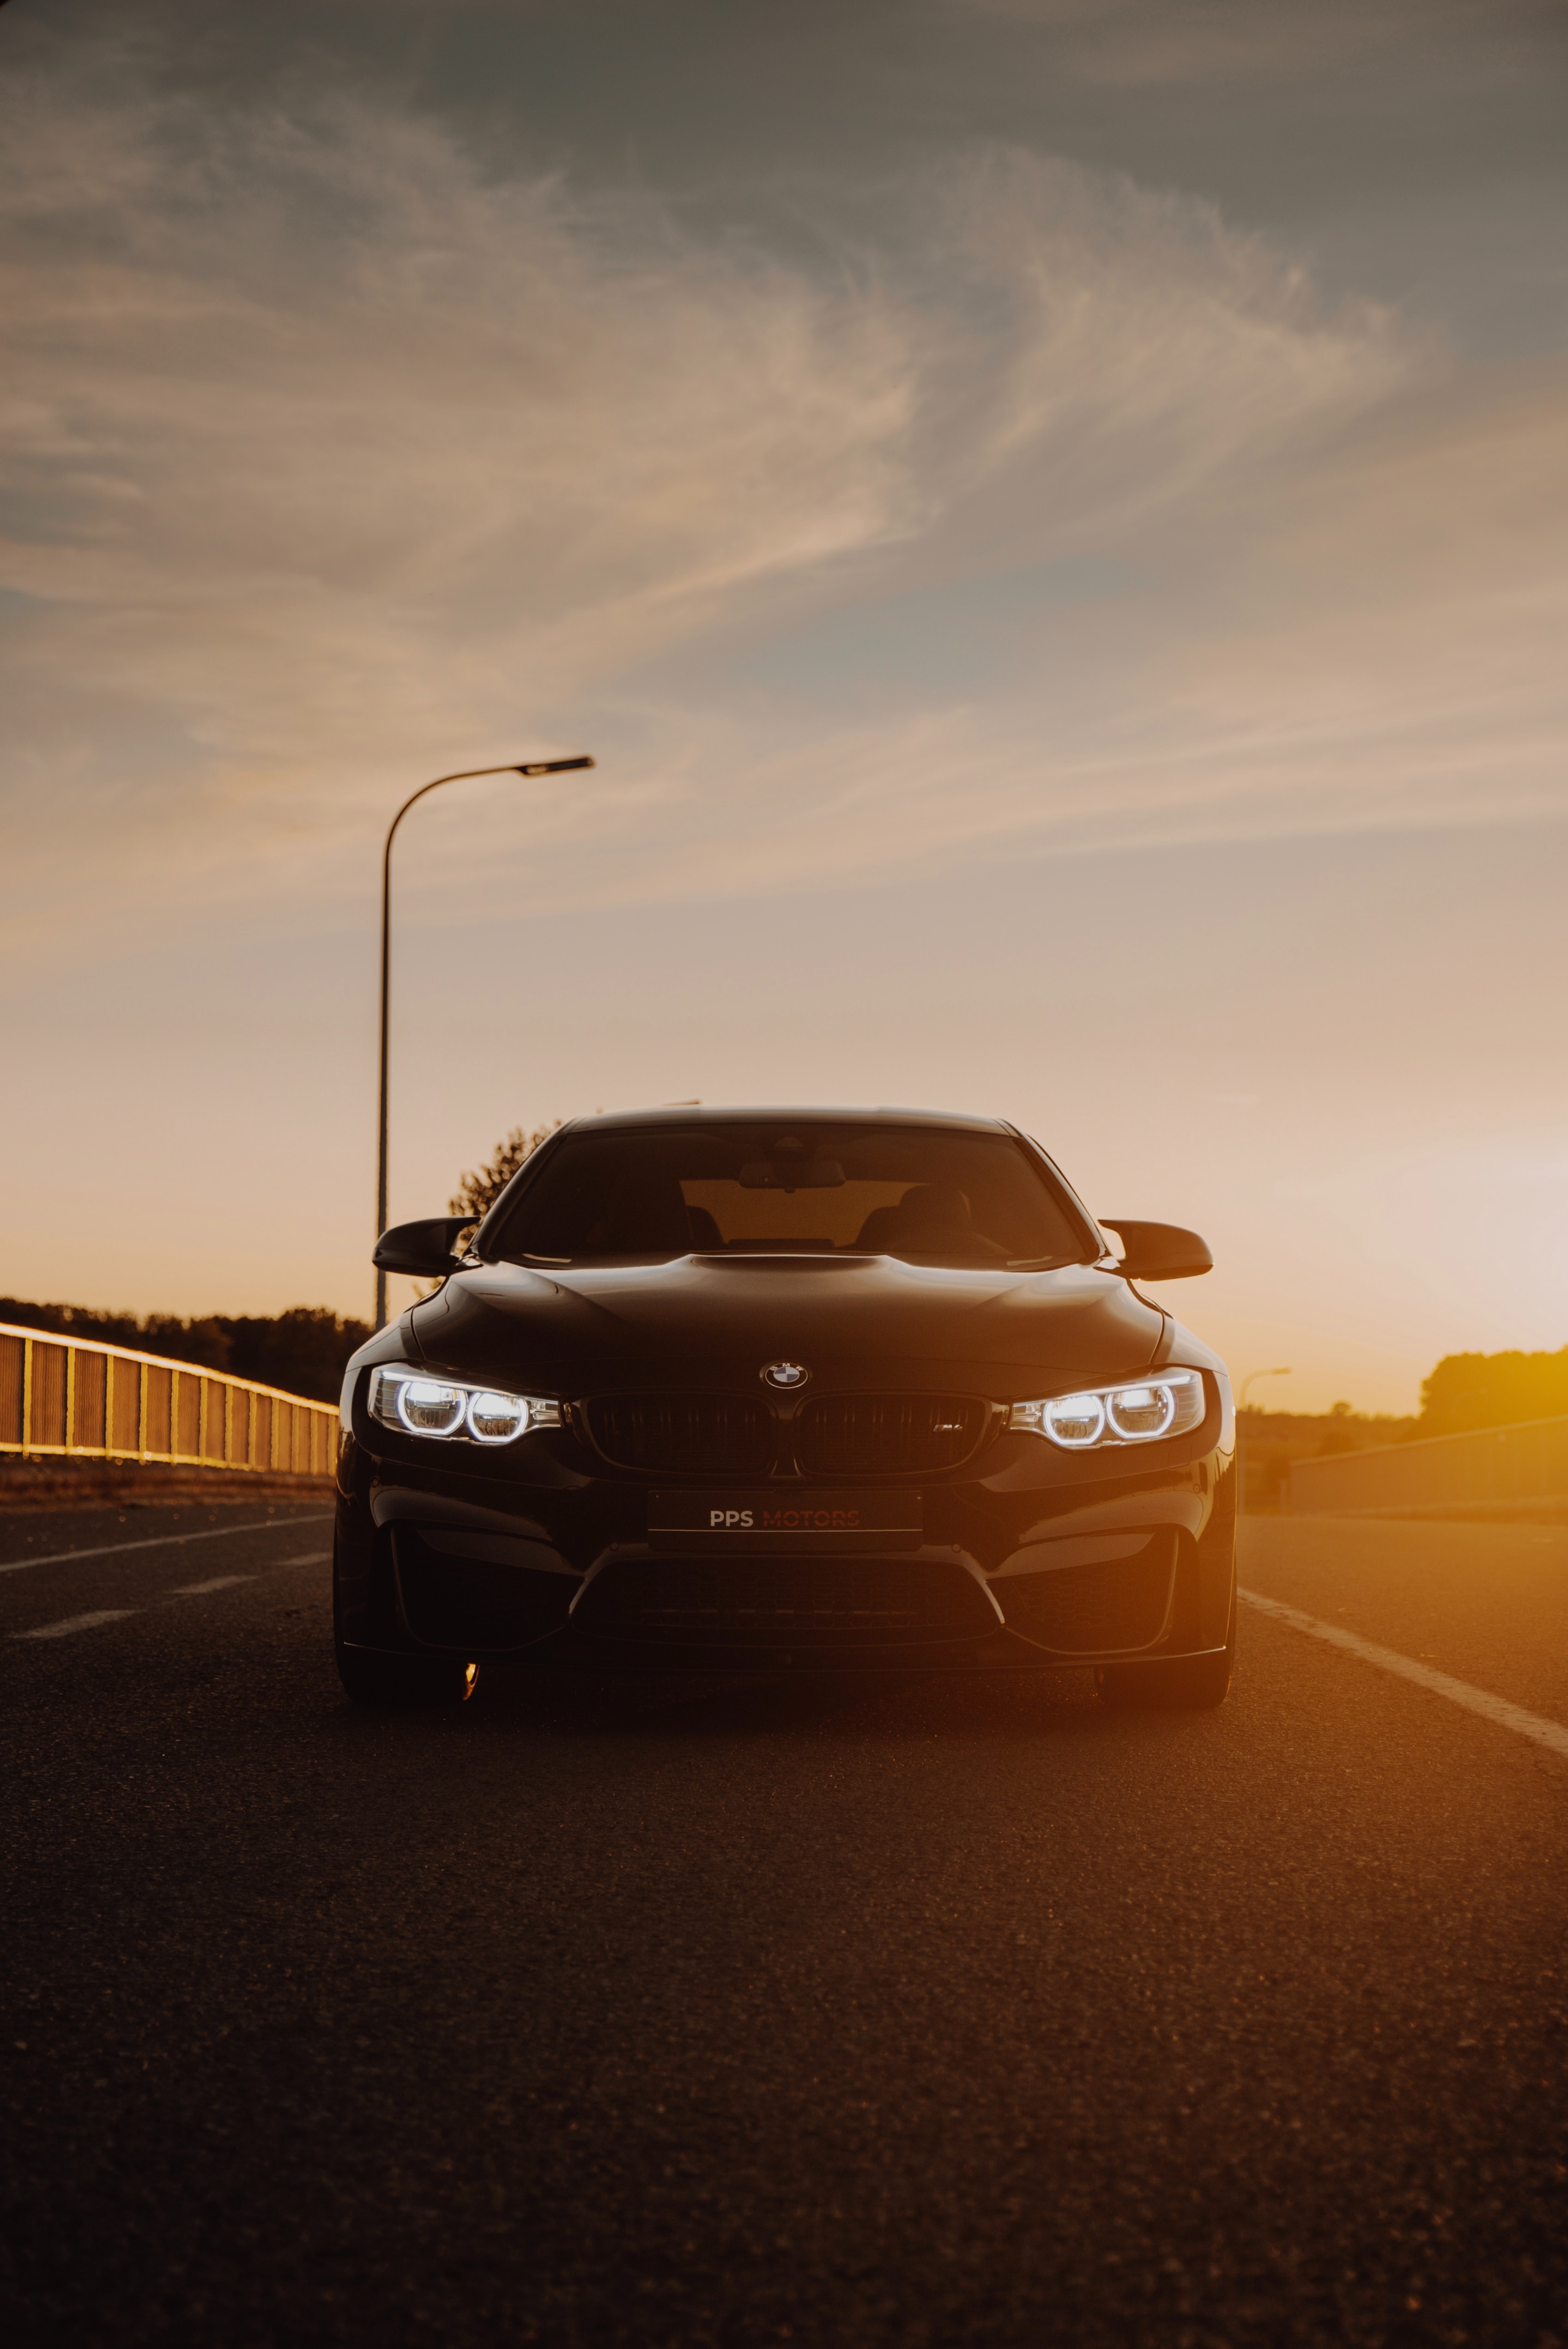 132791 download wallpaper sports, bmw, cars, beams, rays, car, front view, sports car, bmw m4 screensavers and pictures for free